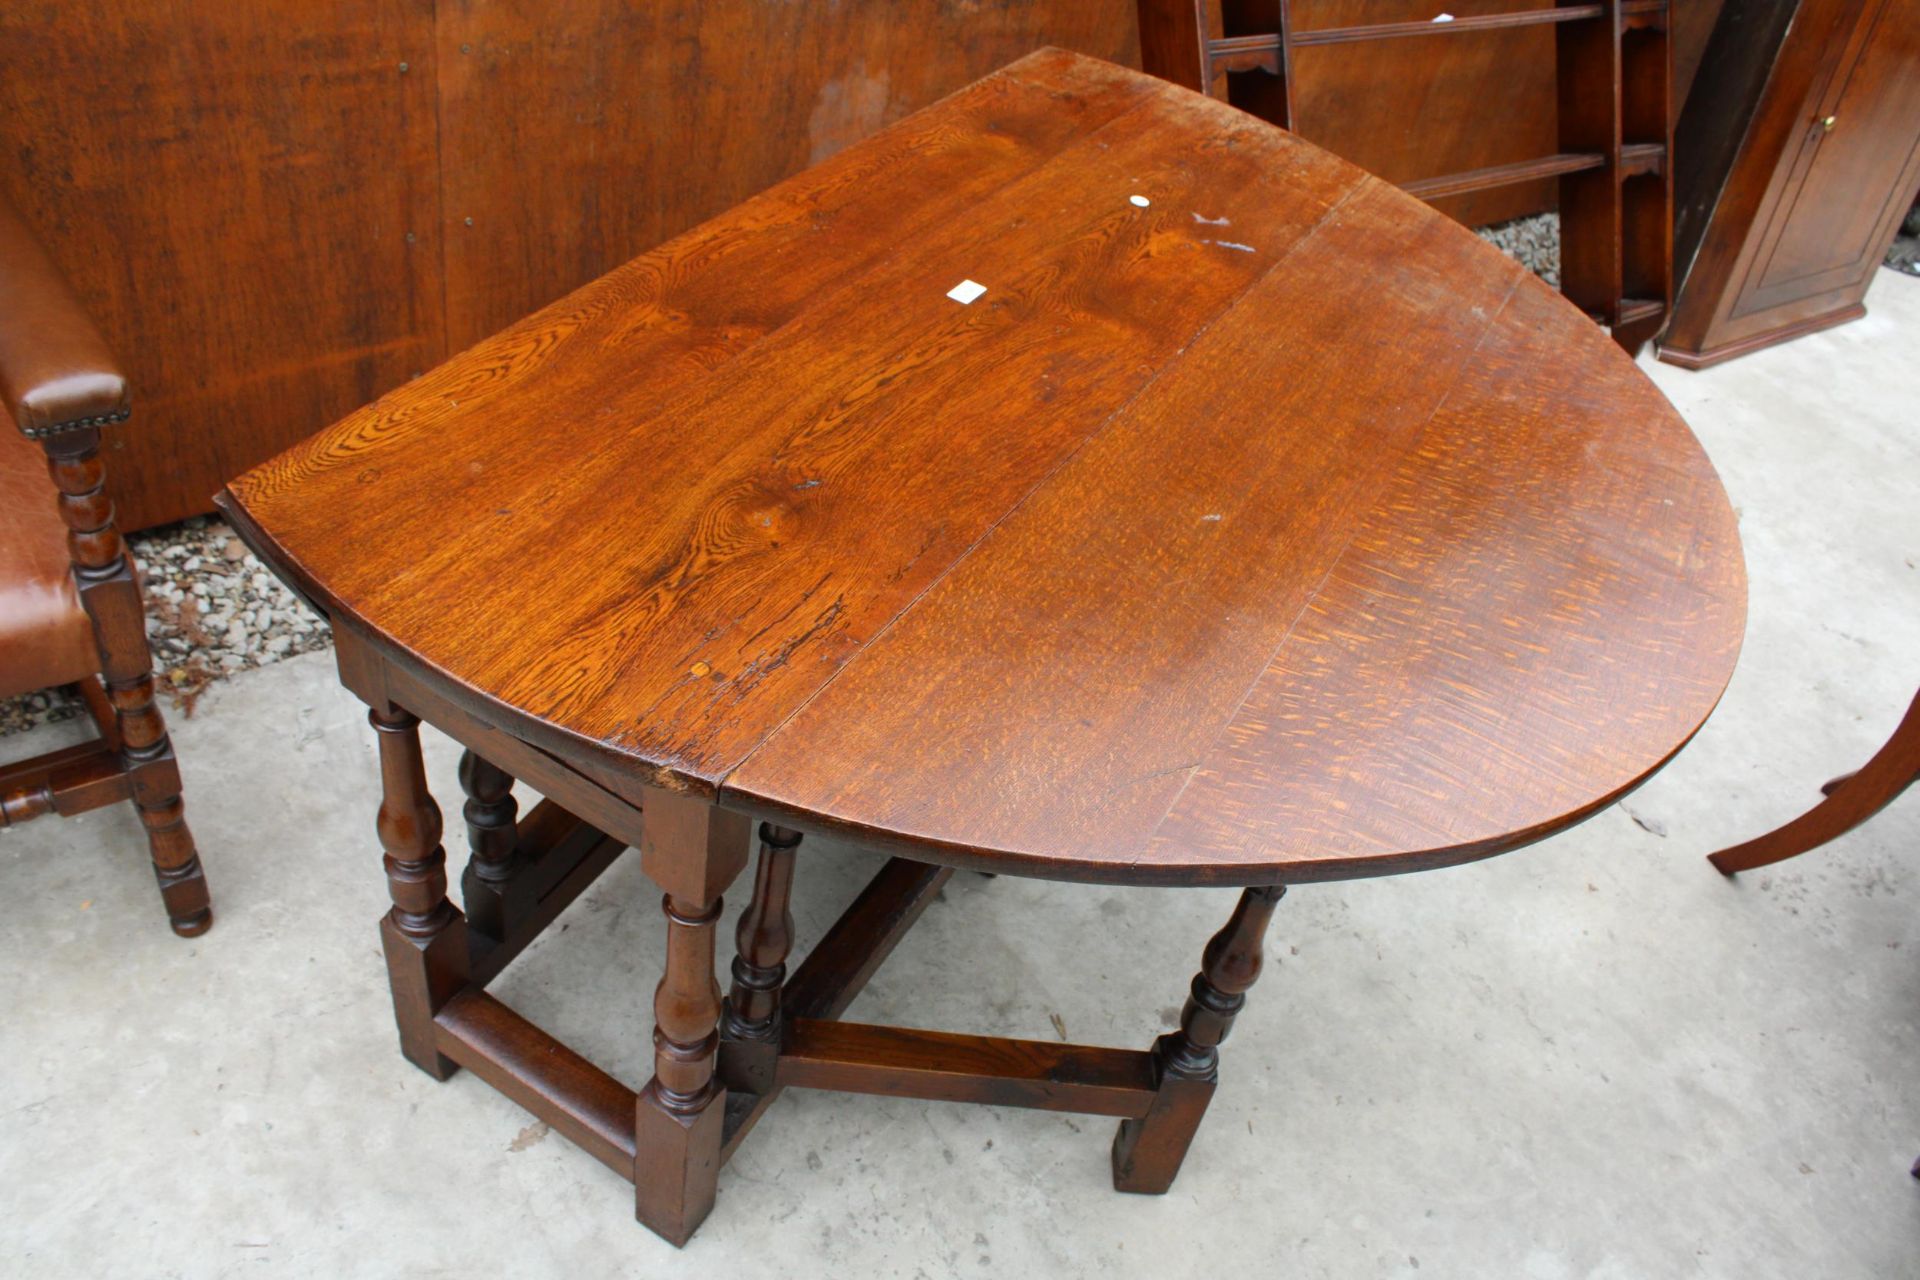 AN OAK GEORGE III OVAL GATE LEG DINING TABLE WITH TWO DRAWERS ON TURNED LEGS 59" X 53" OPENED - Image 2 of 6